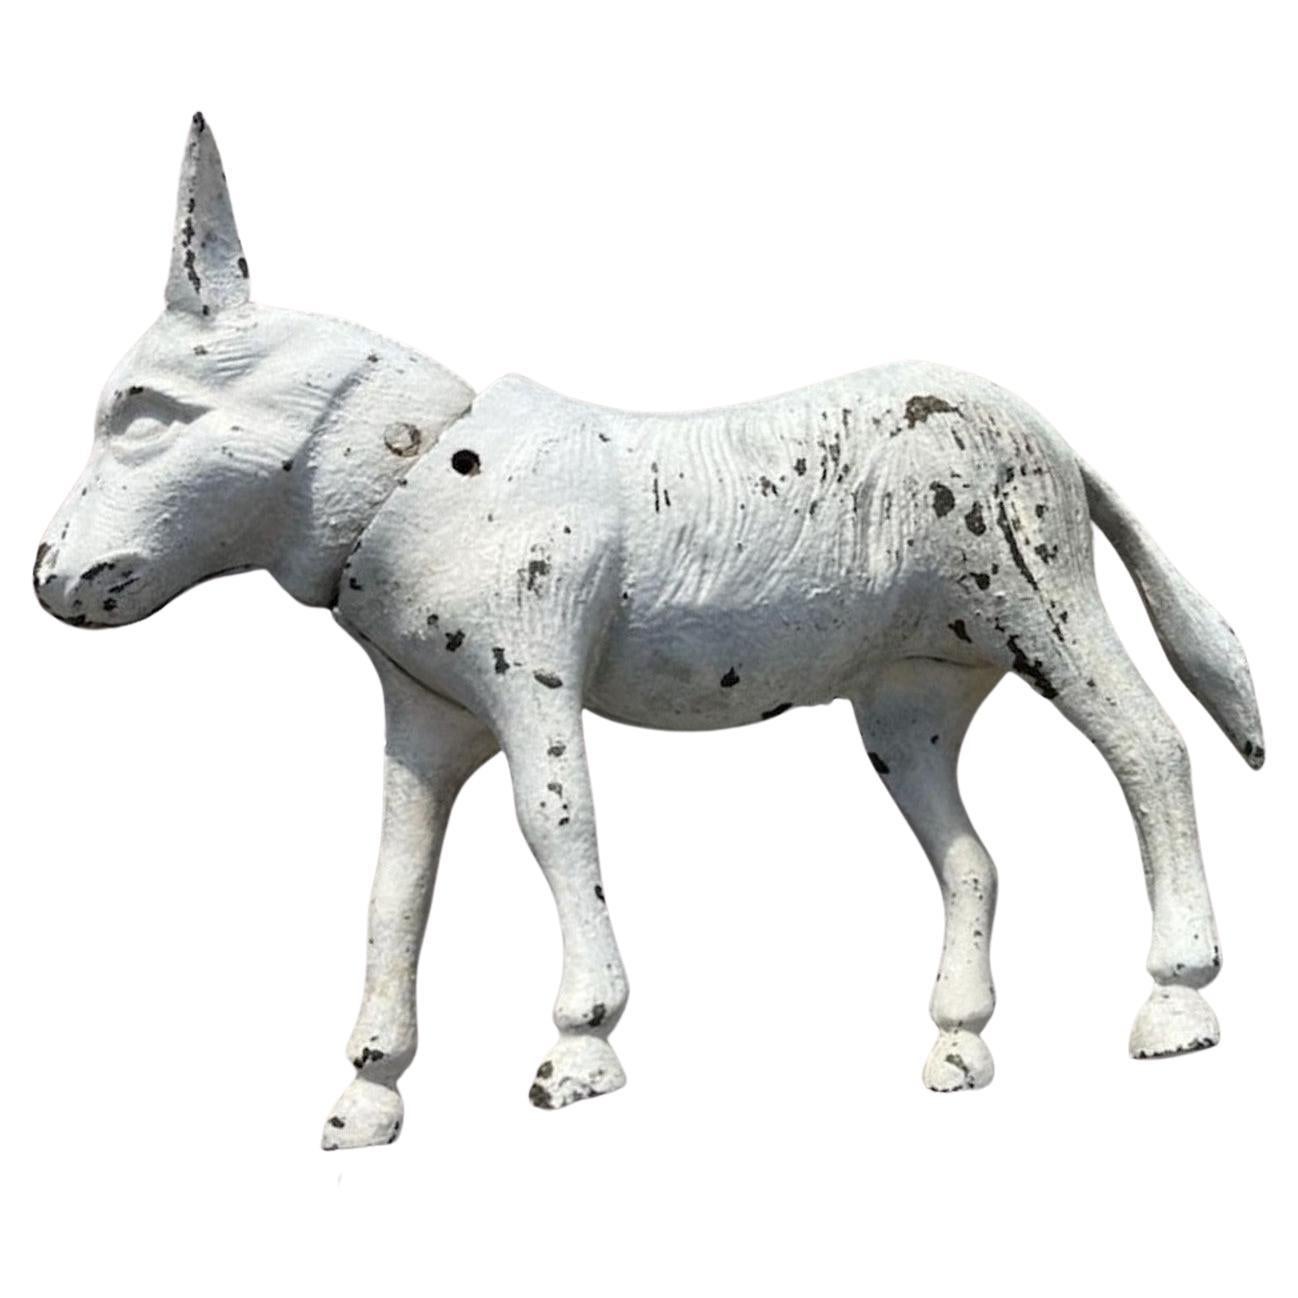 19Thc Original white painted nodder donkey in fine condition and amazing original surface. This donkey could be a door stop or just cool heavy folk art!.